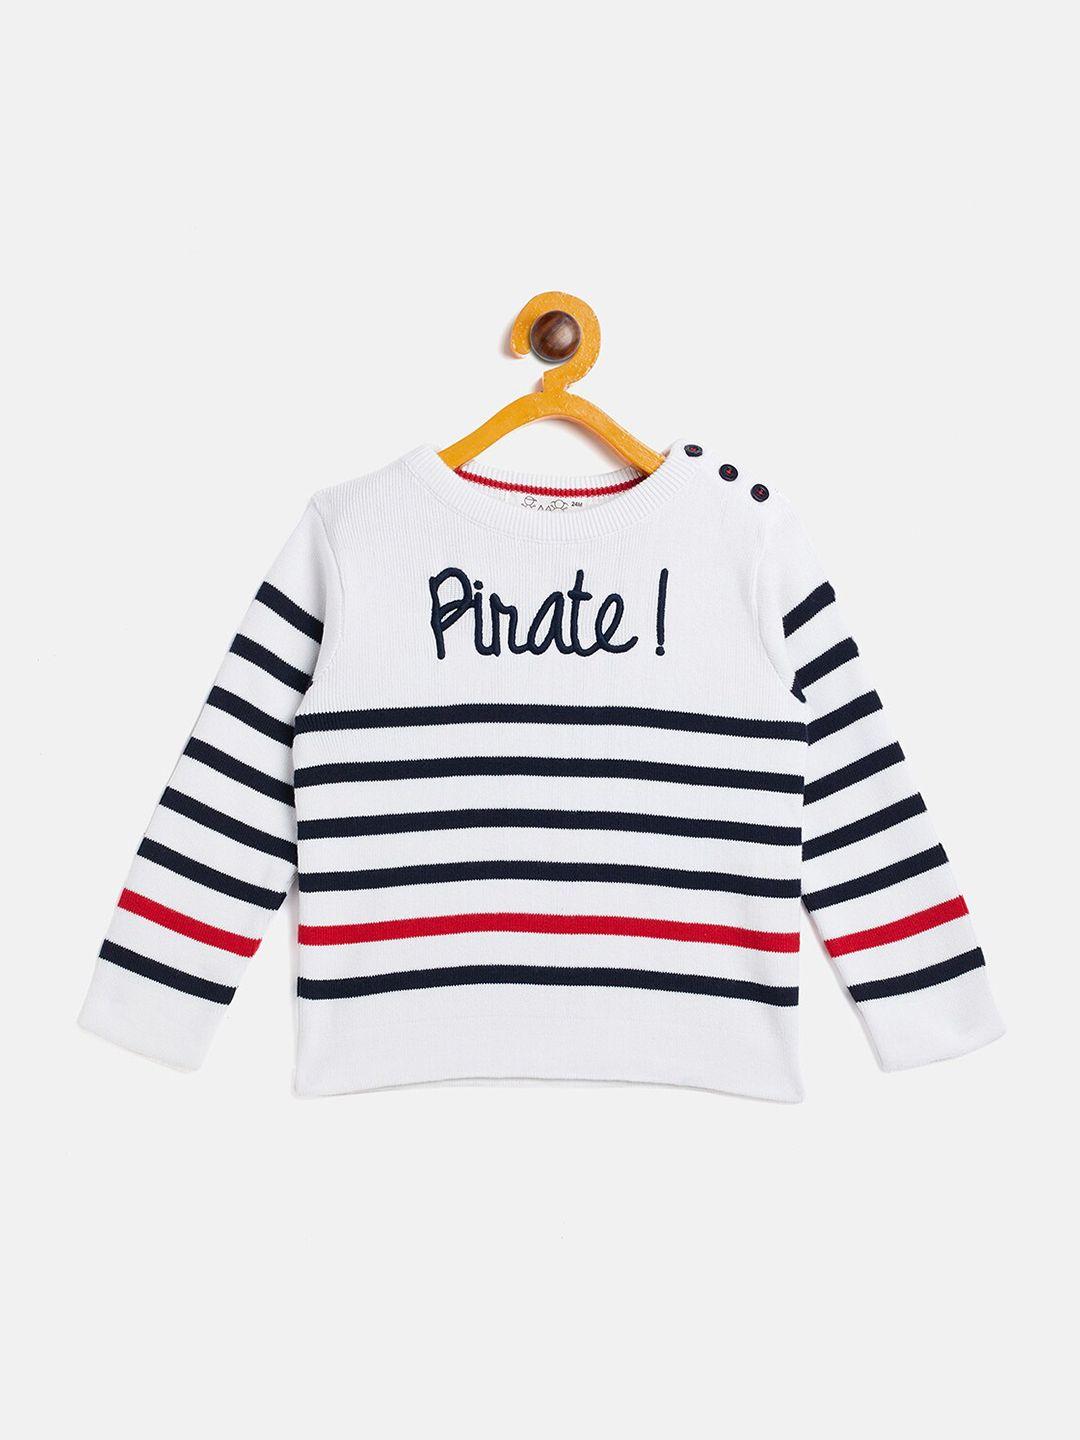 jwaaq unisex kids white & red striped pullover